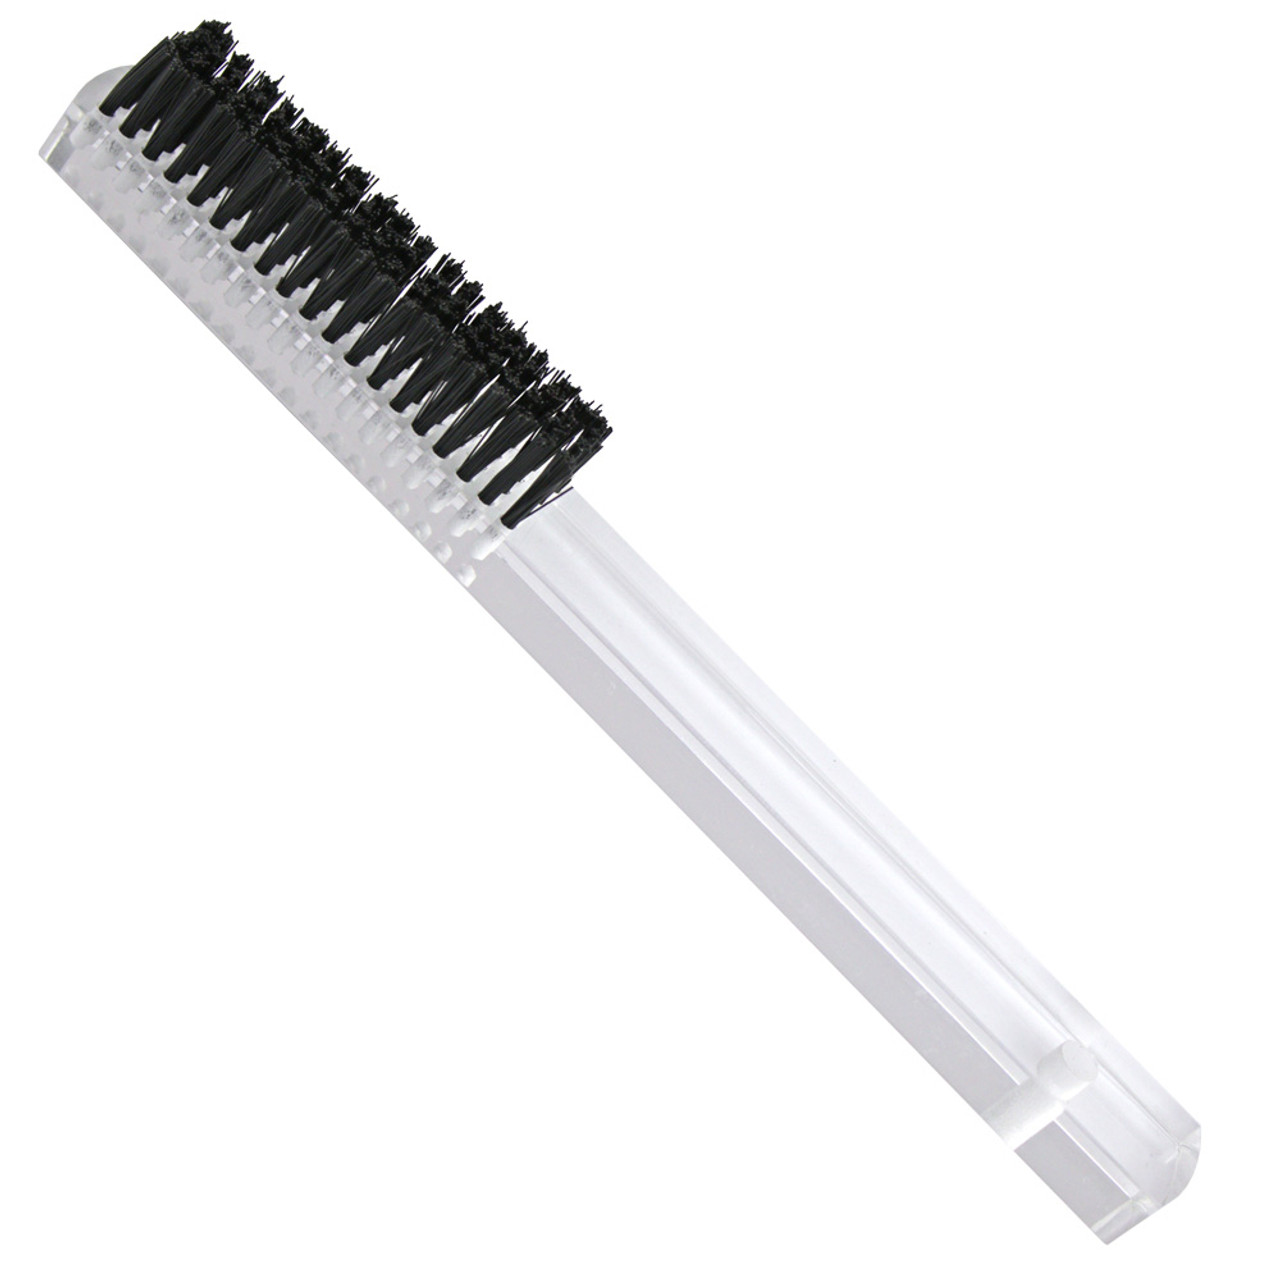 Cleaning Brush with Nylon Bristles, Narrow , 7 long, 3 per pack